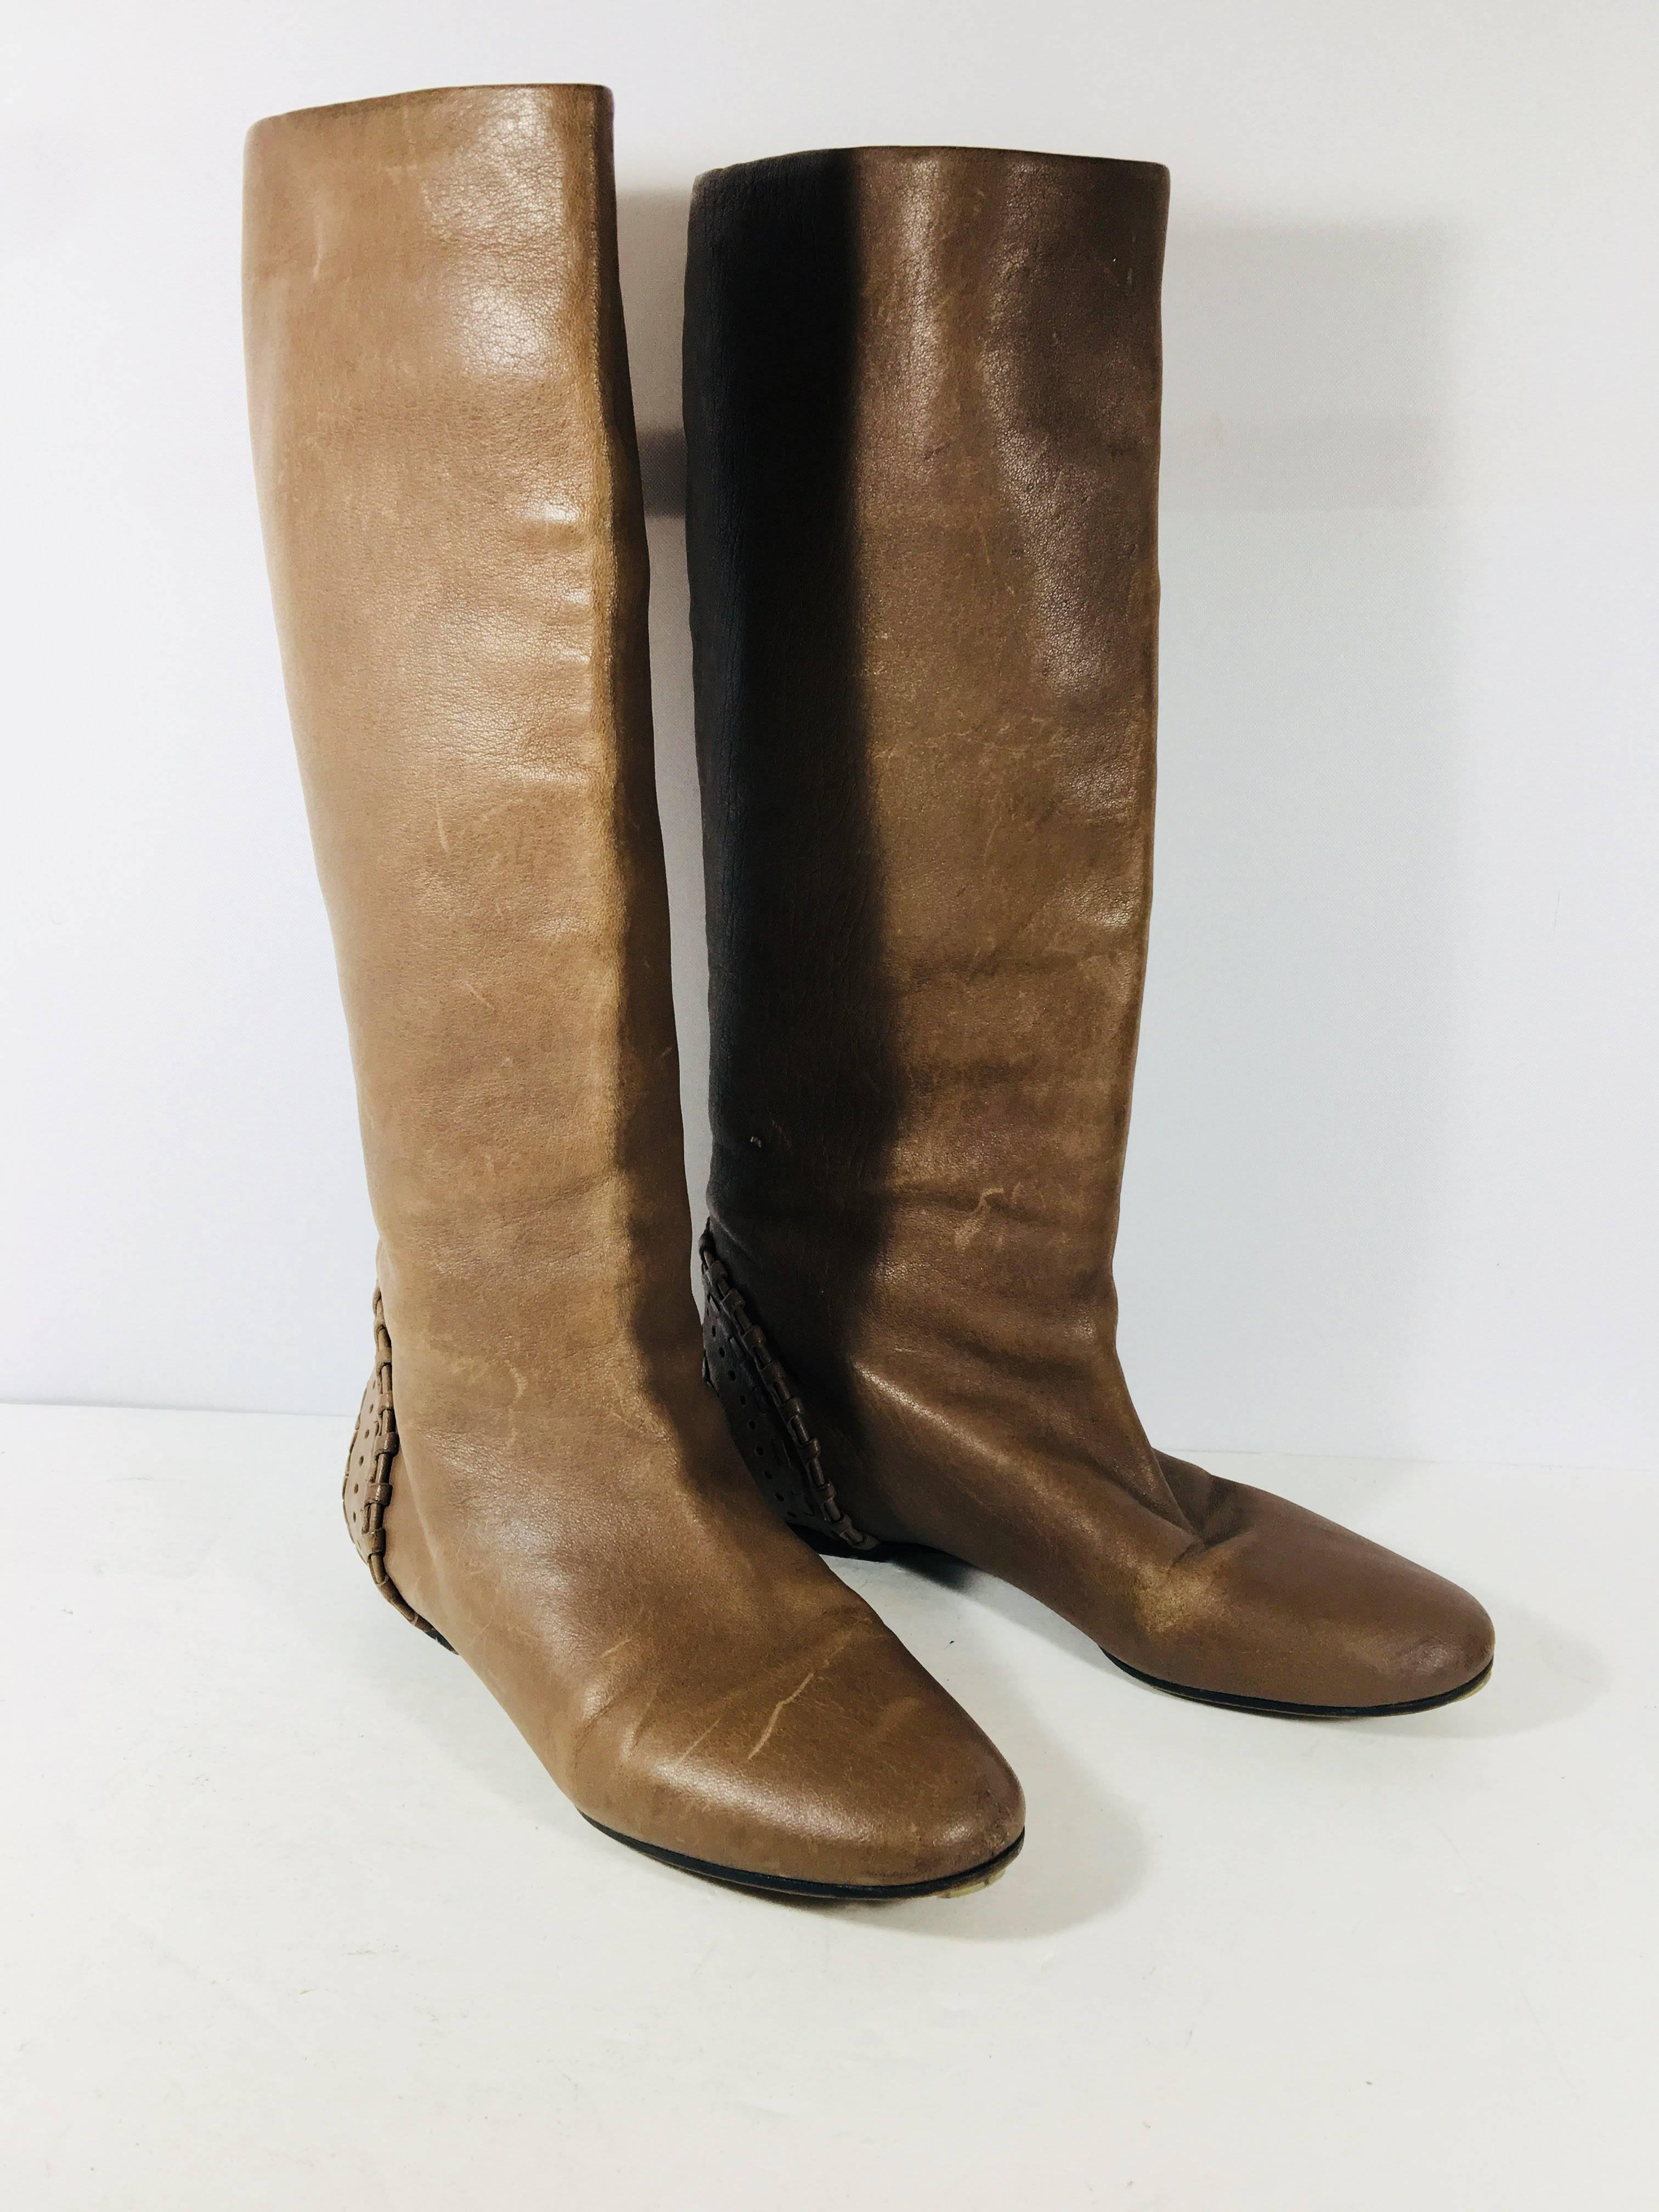 Chloe Knee High Boots in Brown Leather with Stitching at Heel.